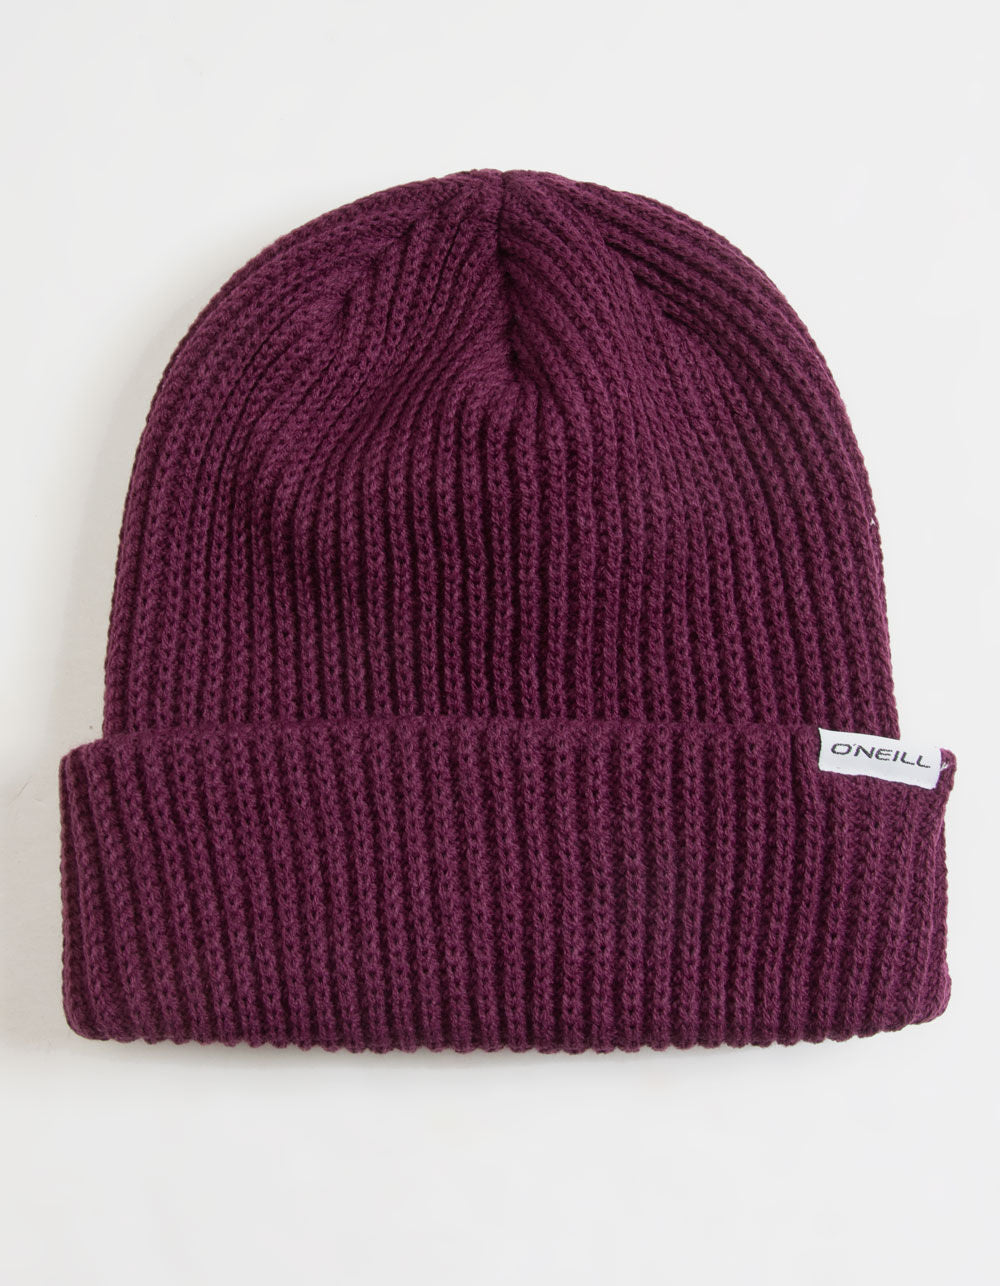 Groceries Beanie- Plum - Island Outfitters